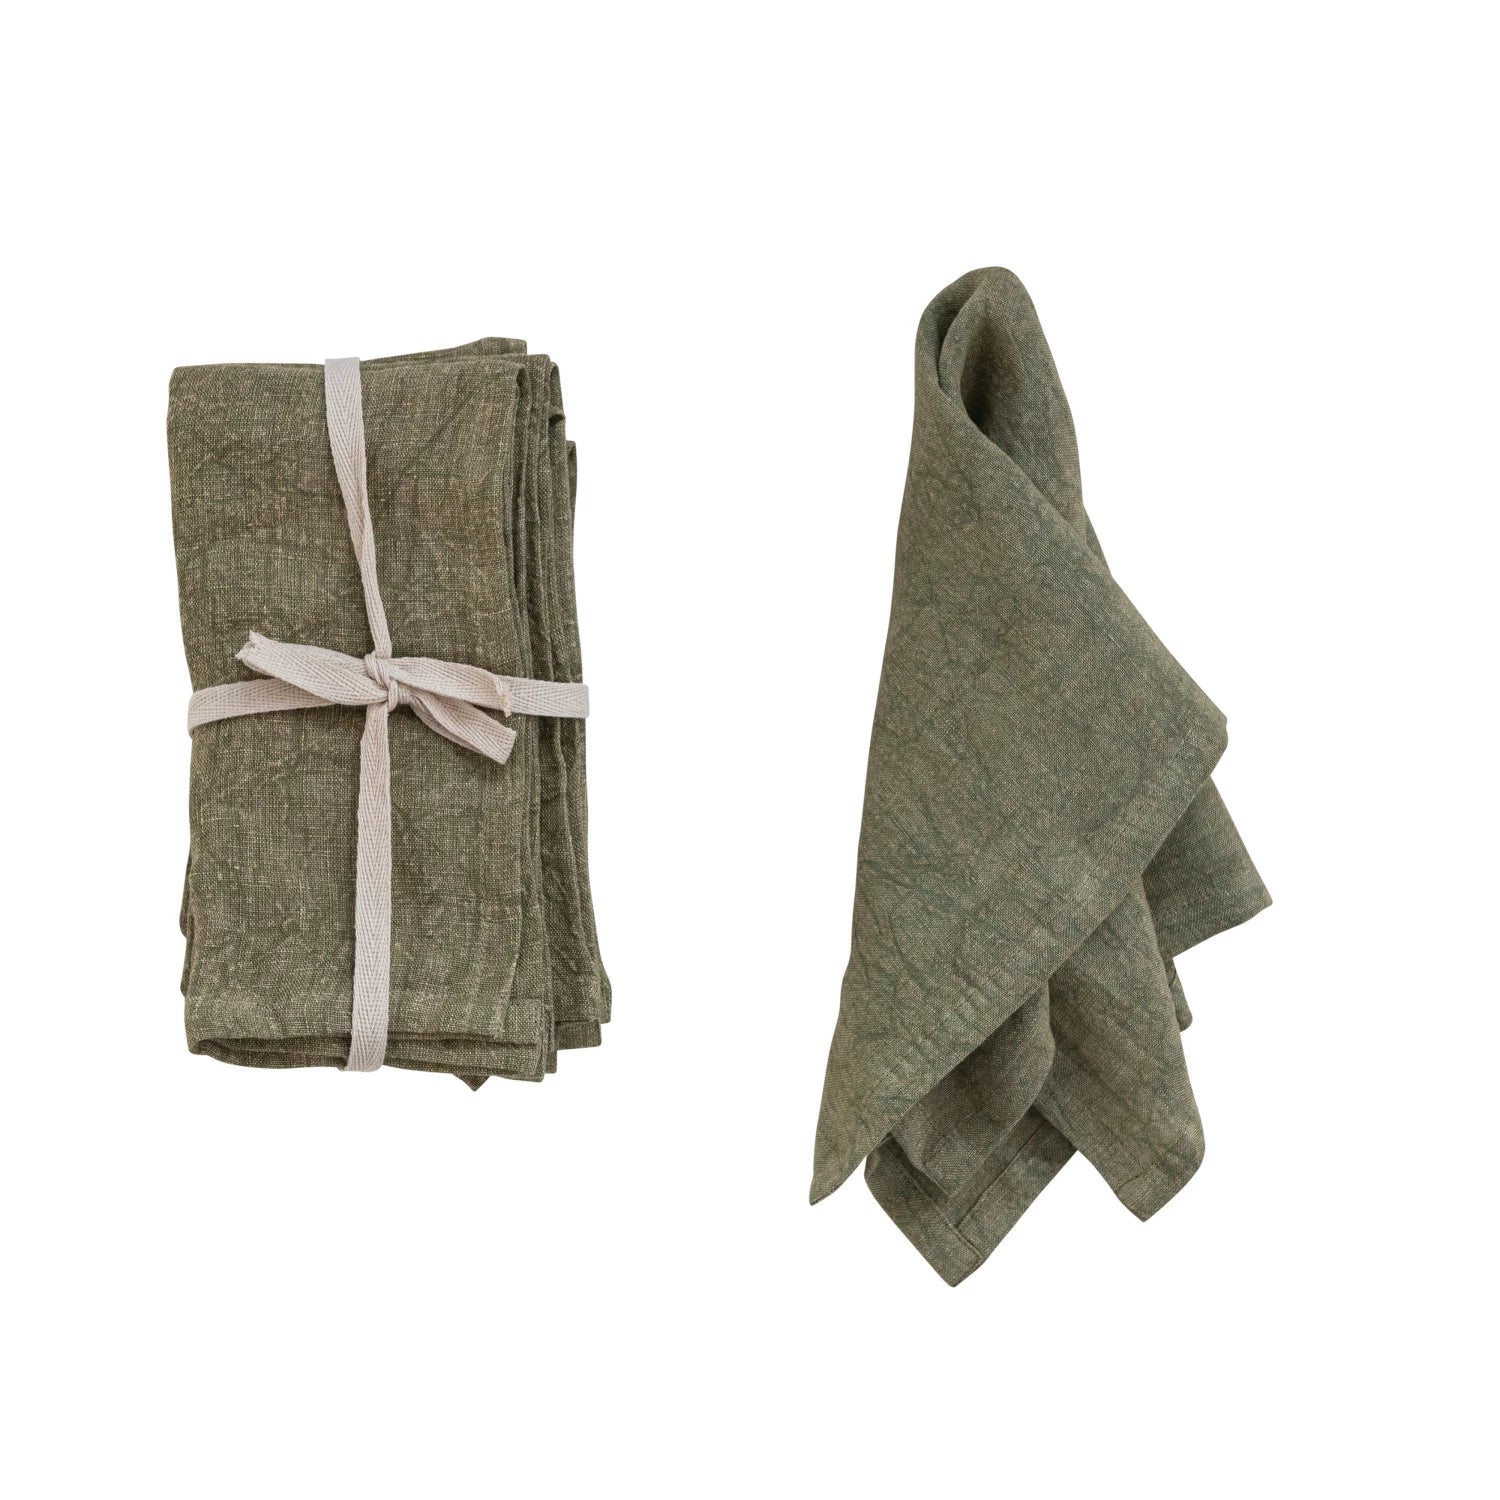 set of folded olive Stonewashed Linen Napkins tied with ribbon and one displayed draped over itself on a white background